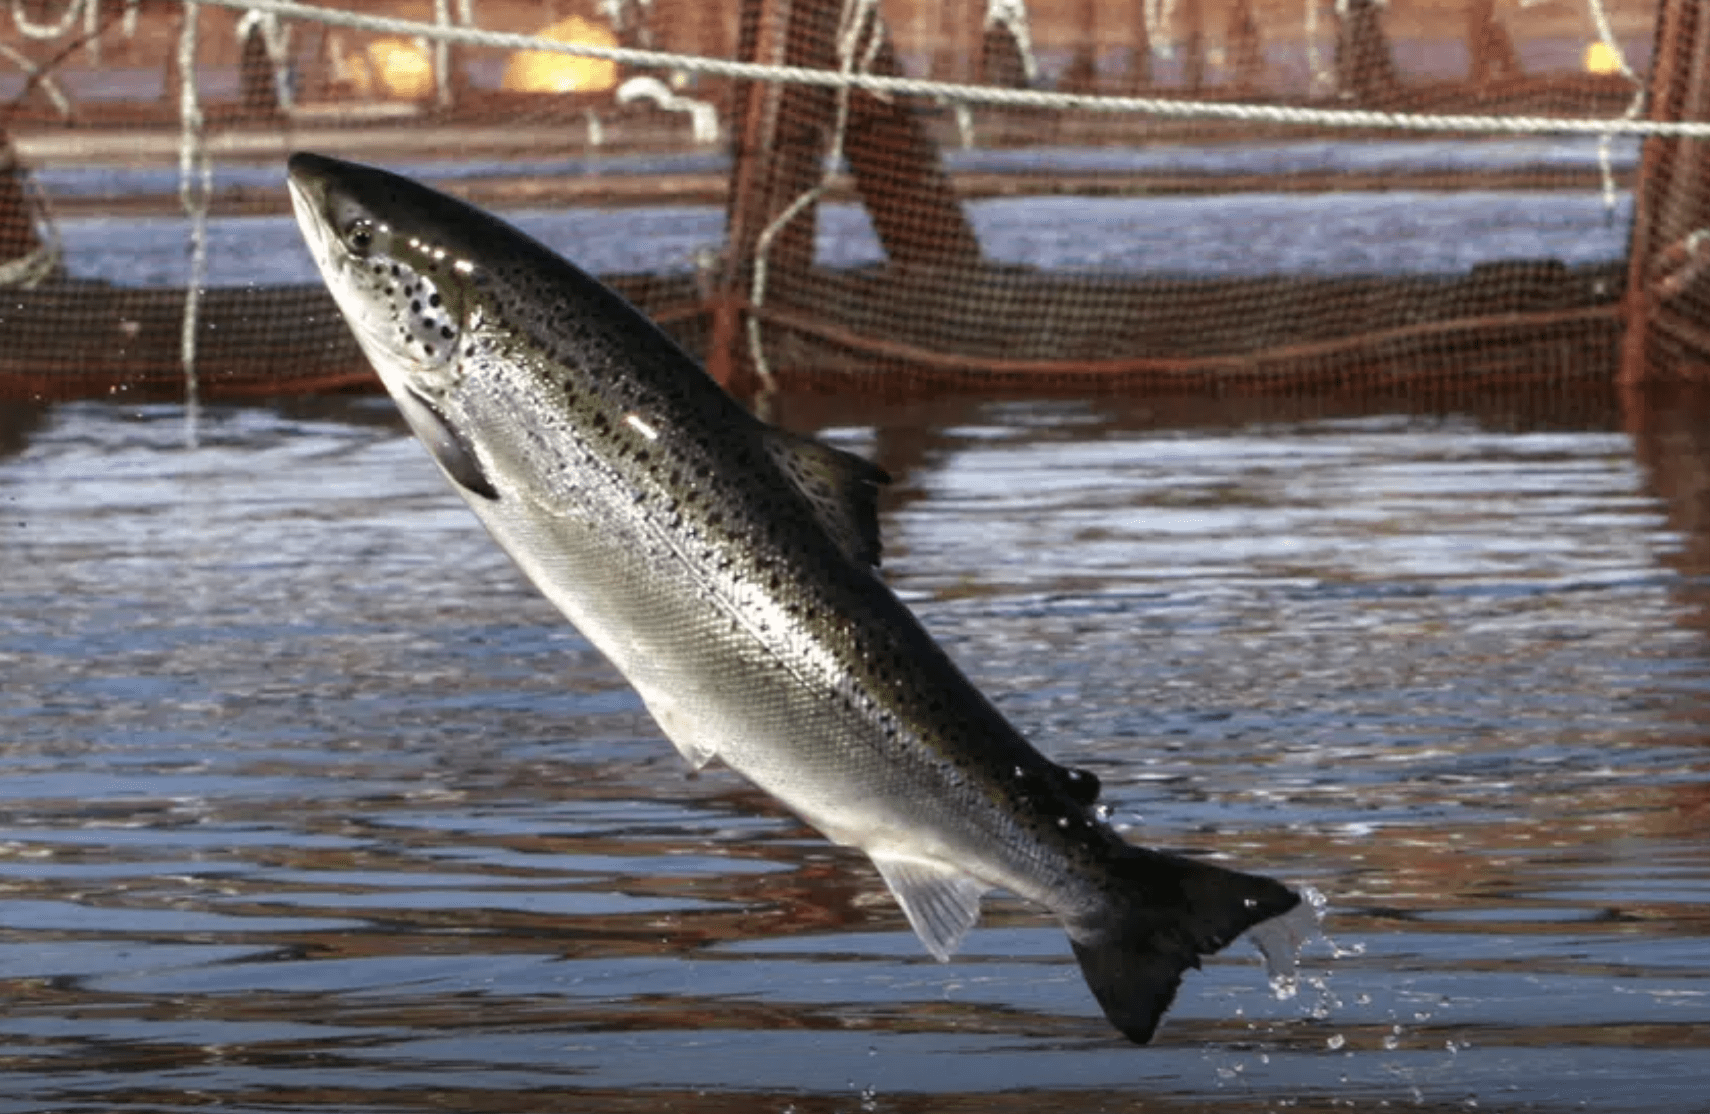 An Atlantic salmon leaps out of the water (AP Photo/Robert F. Bukaty, File)